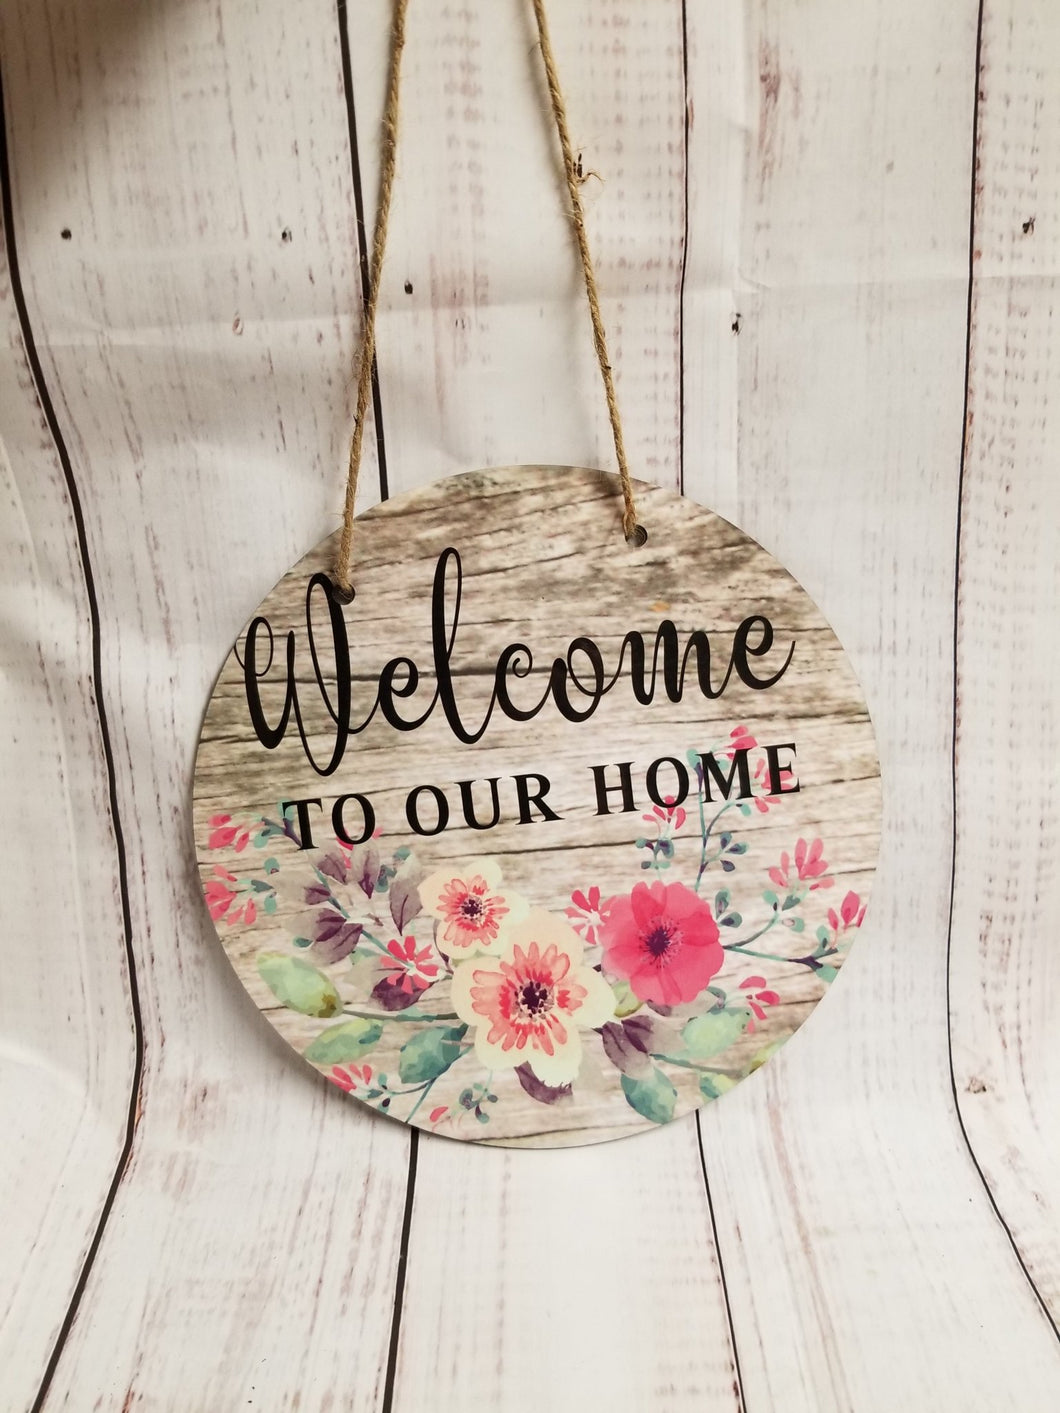 Welcome to our home door hanger 10 inch - My Other Child / Blooms n' Rooms